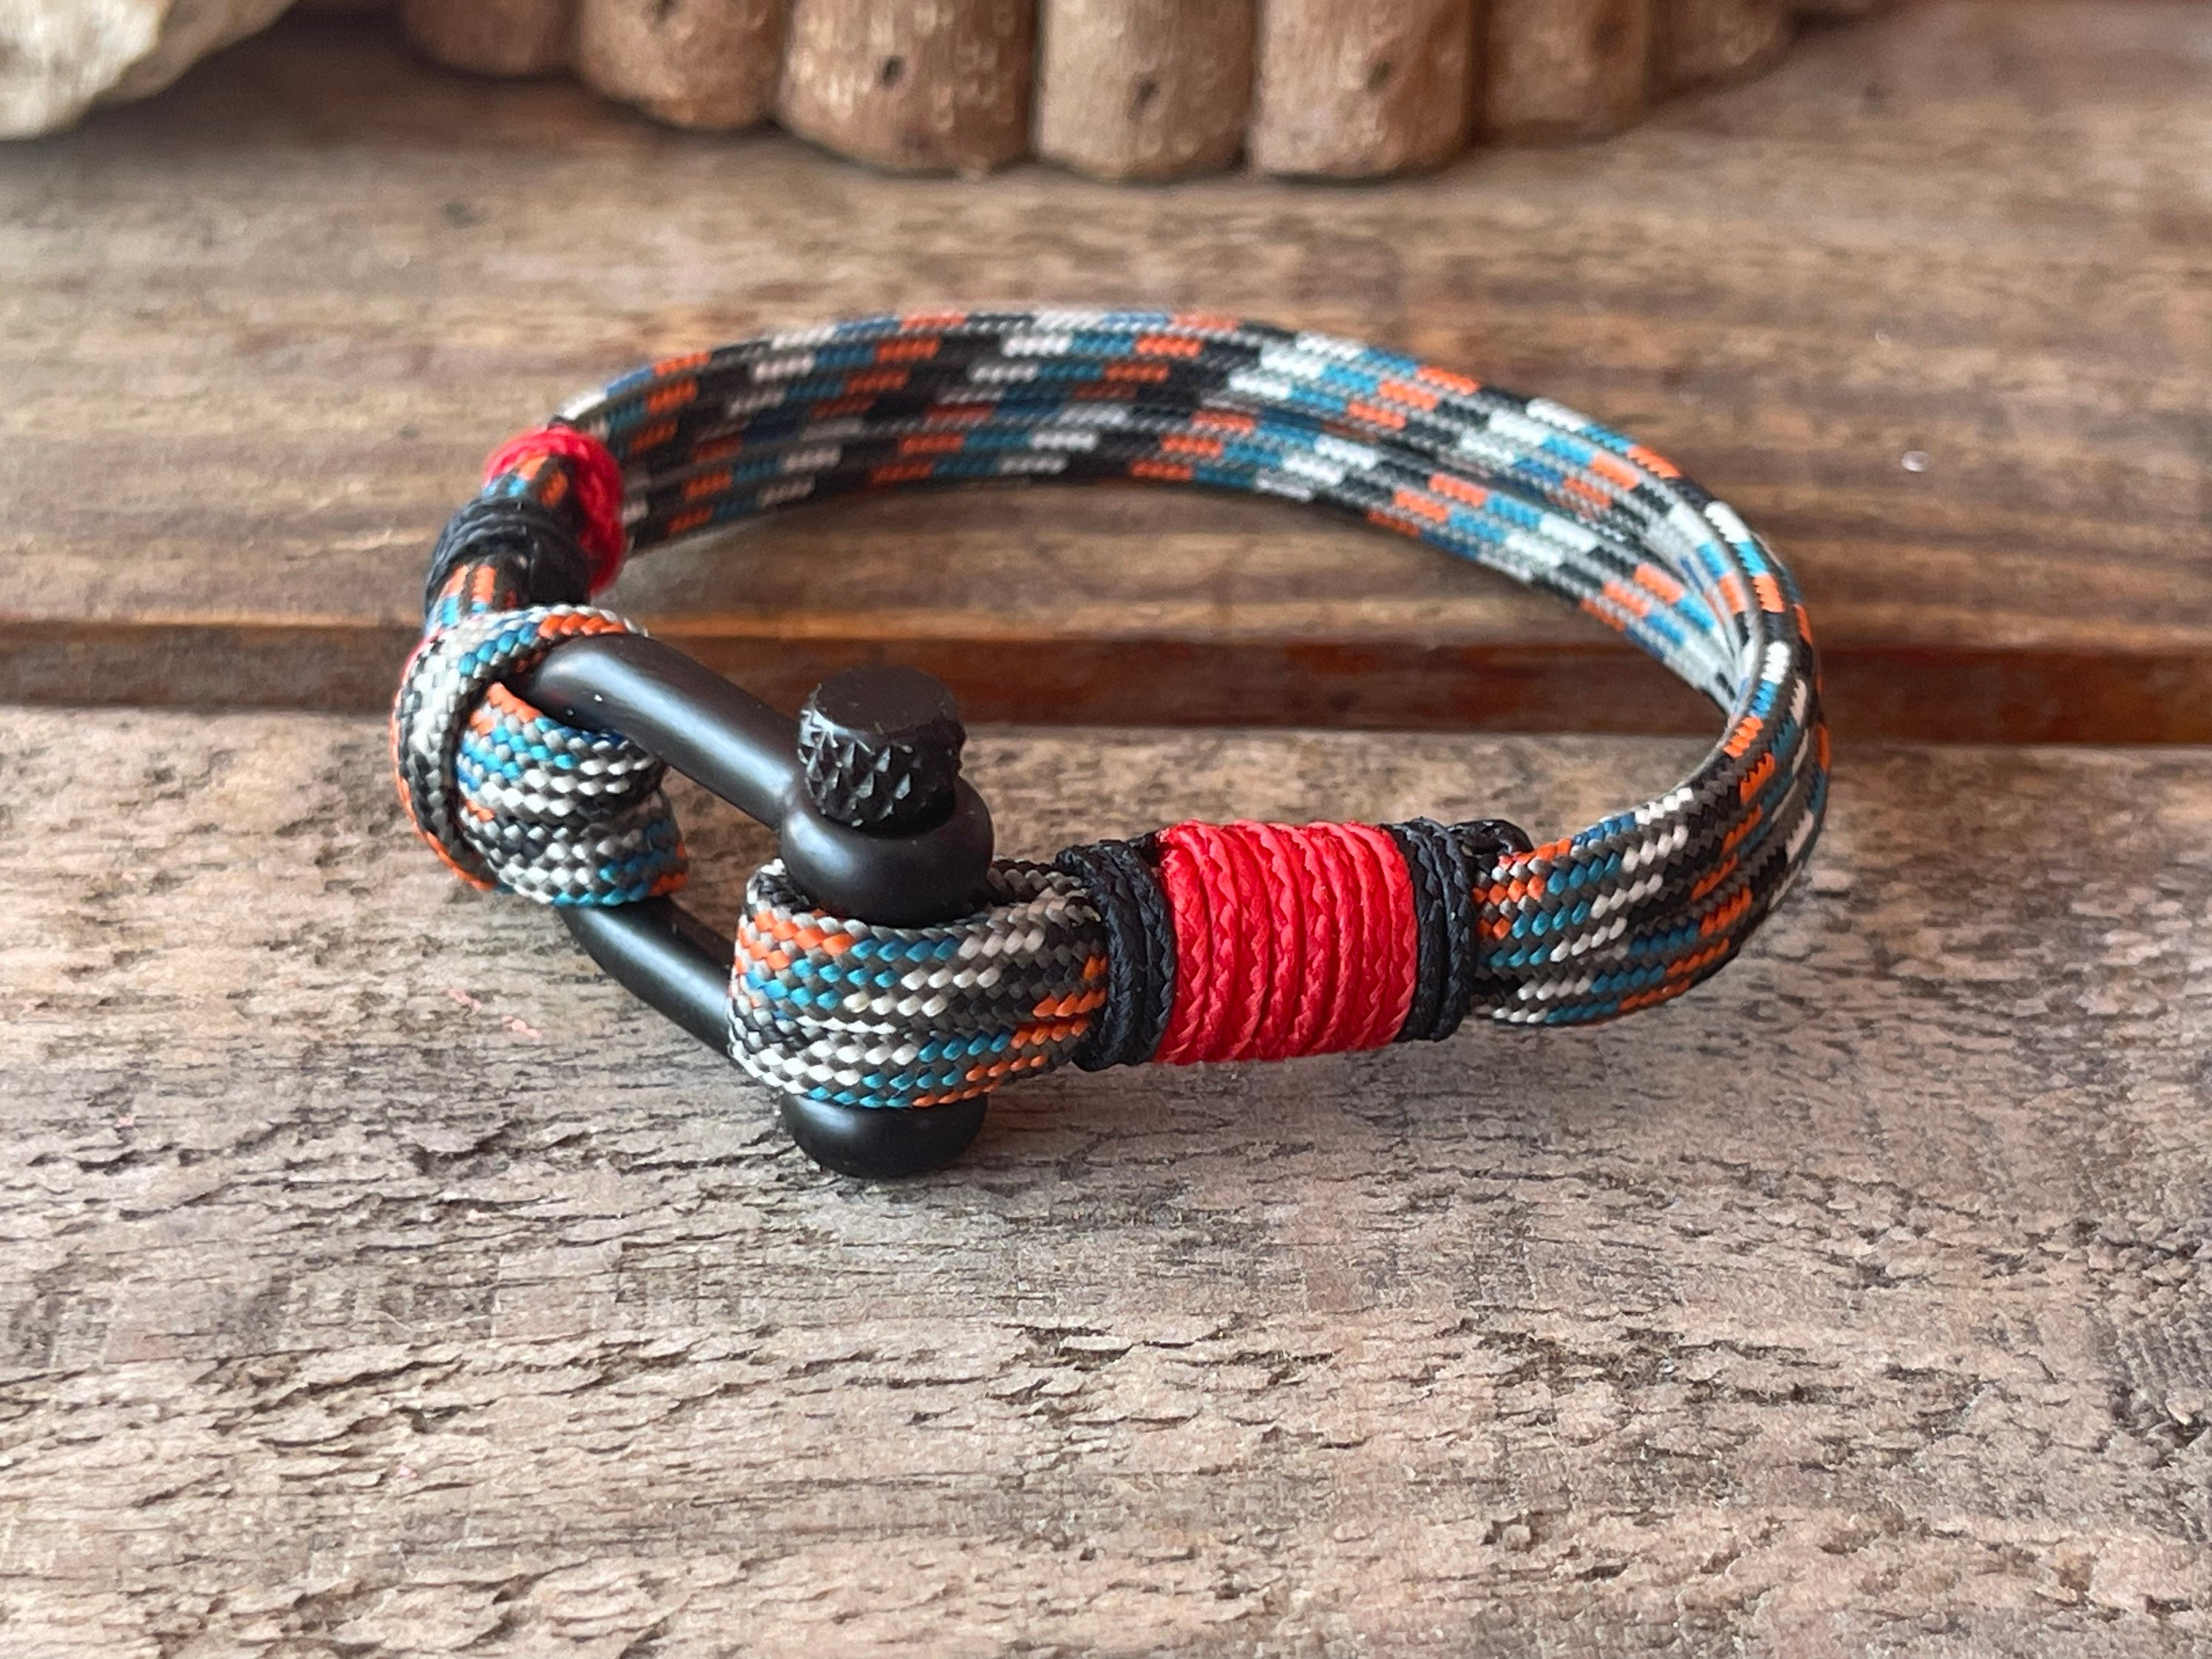 How to Make Paracord Bracelet With or Without Buckle